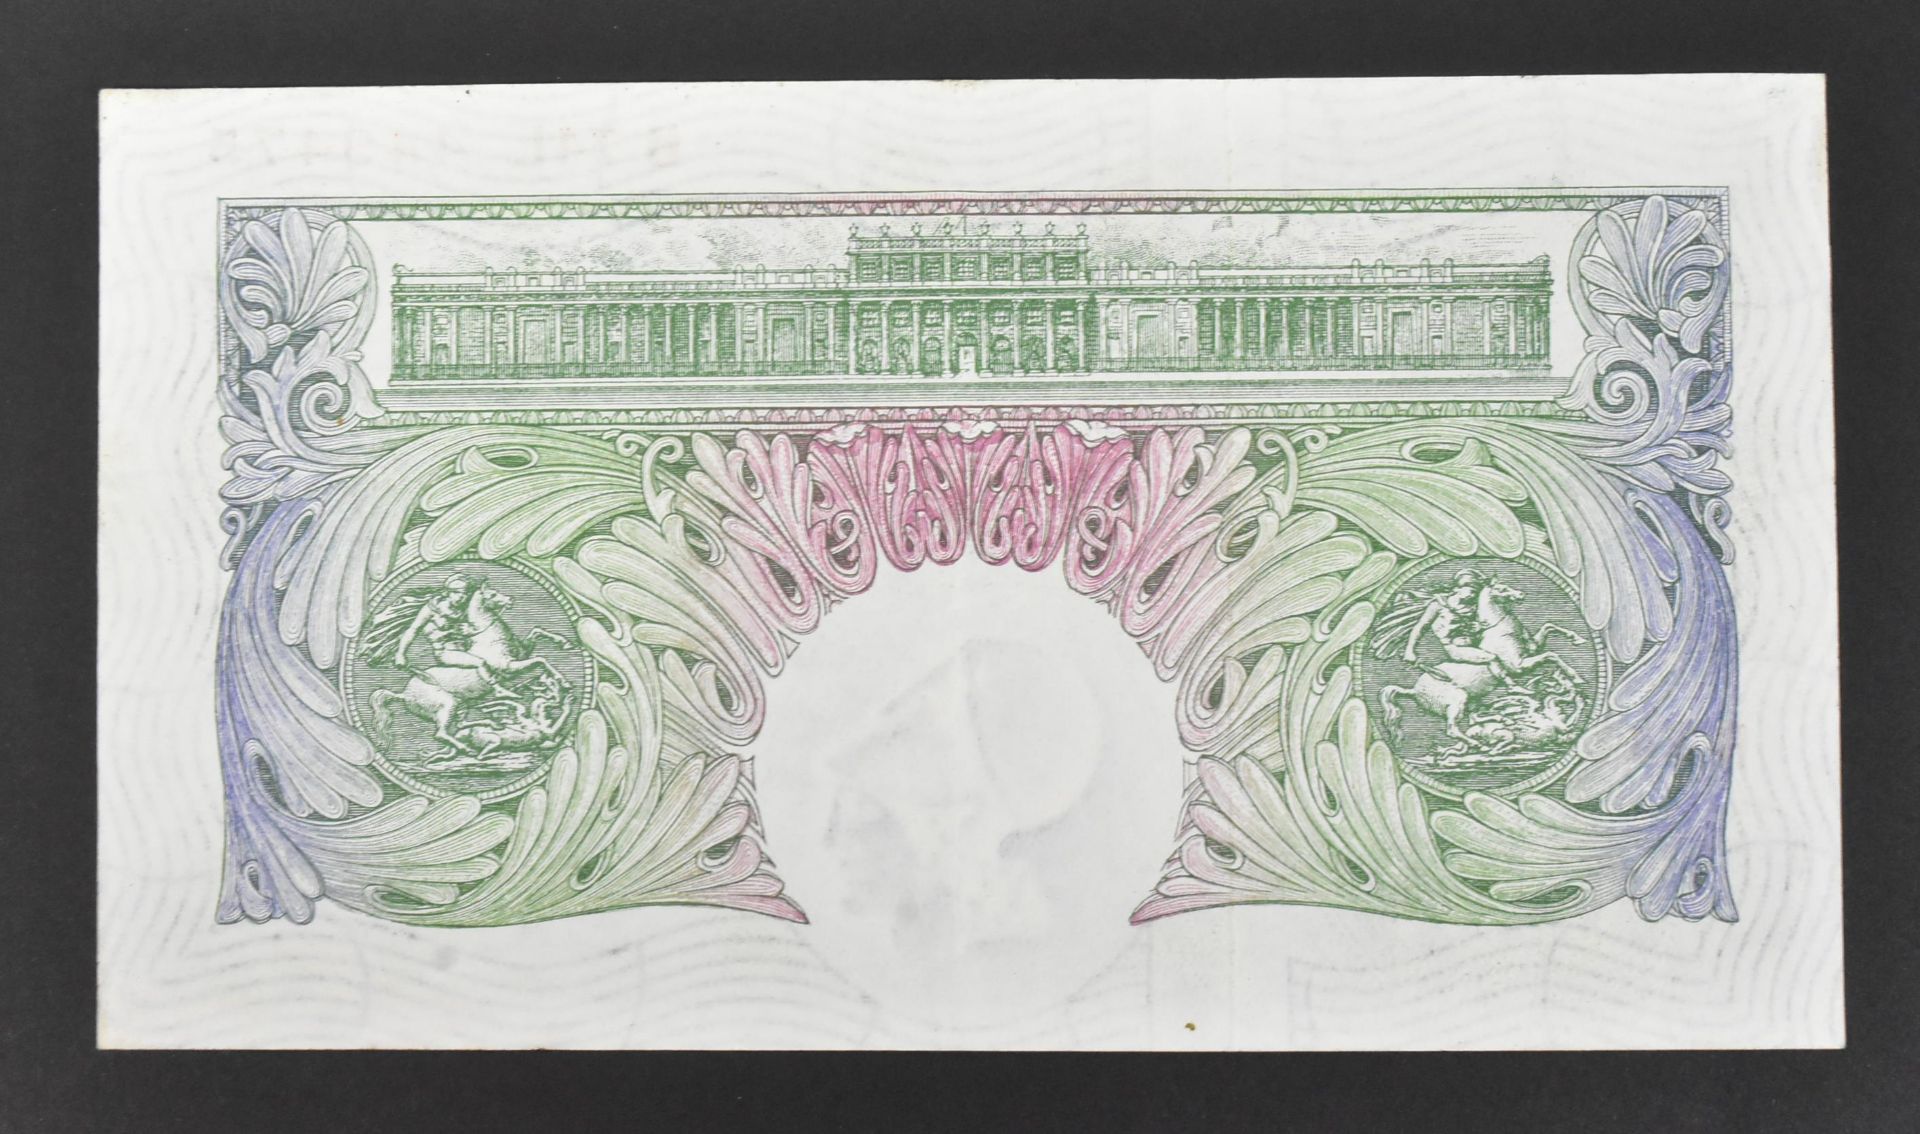 COLLECTION BRITISH UNCIRCULATED BANK NOTES - Image 57 of 61